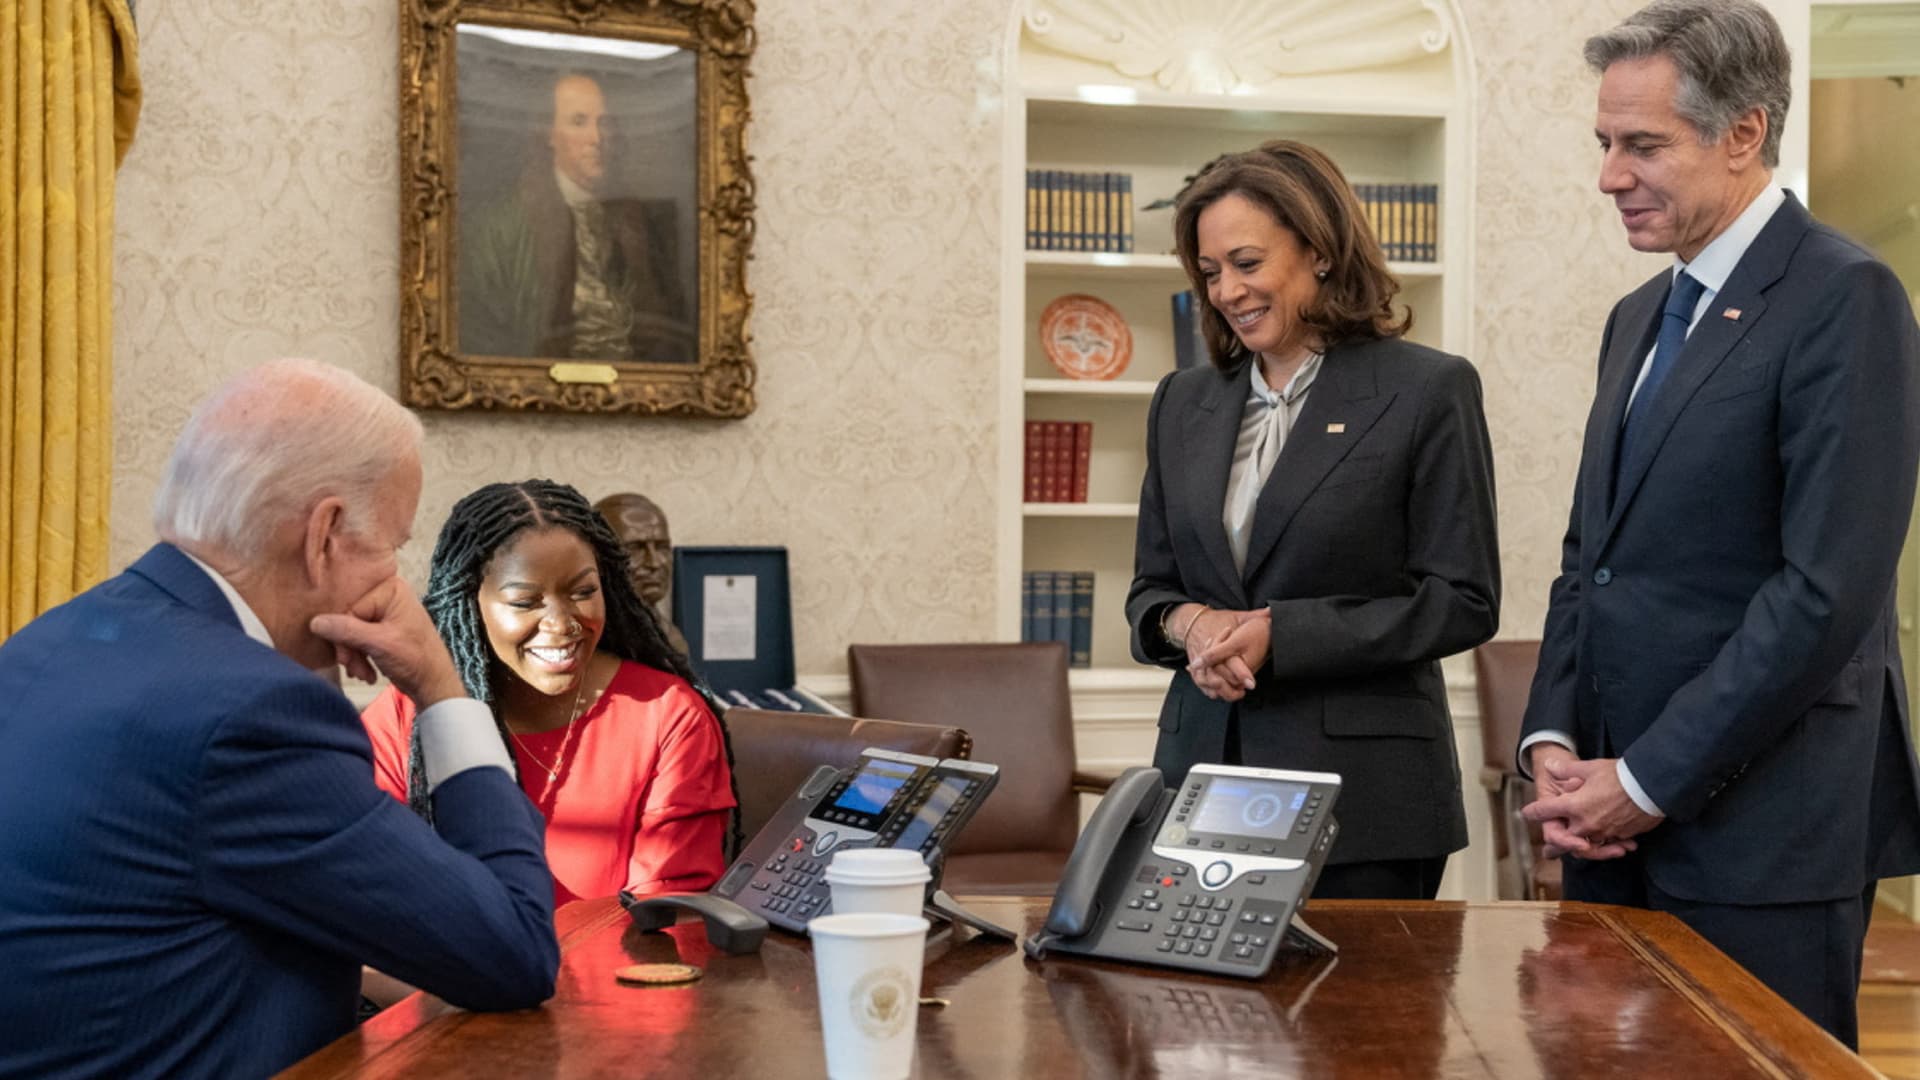 U.S. President Joe Biden and Cherelle Griner speak on the phone with WNBA basketball star Brittney Griner after her release by Russia, in this White House handout photo taken in the Oval Office, as Vice President Kamala Harris and U.S. Secretary of State Antony Blinken look on, at the White House in Washington, U.S. December 8, 2022.